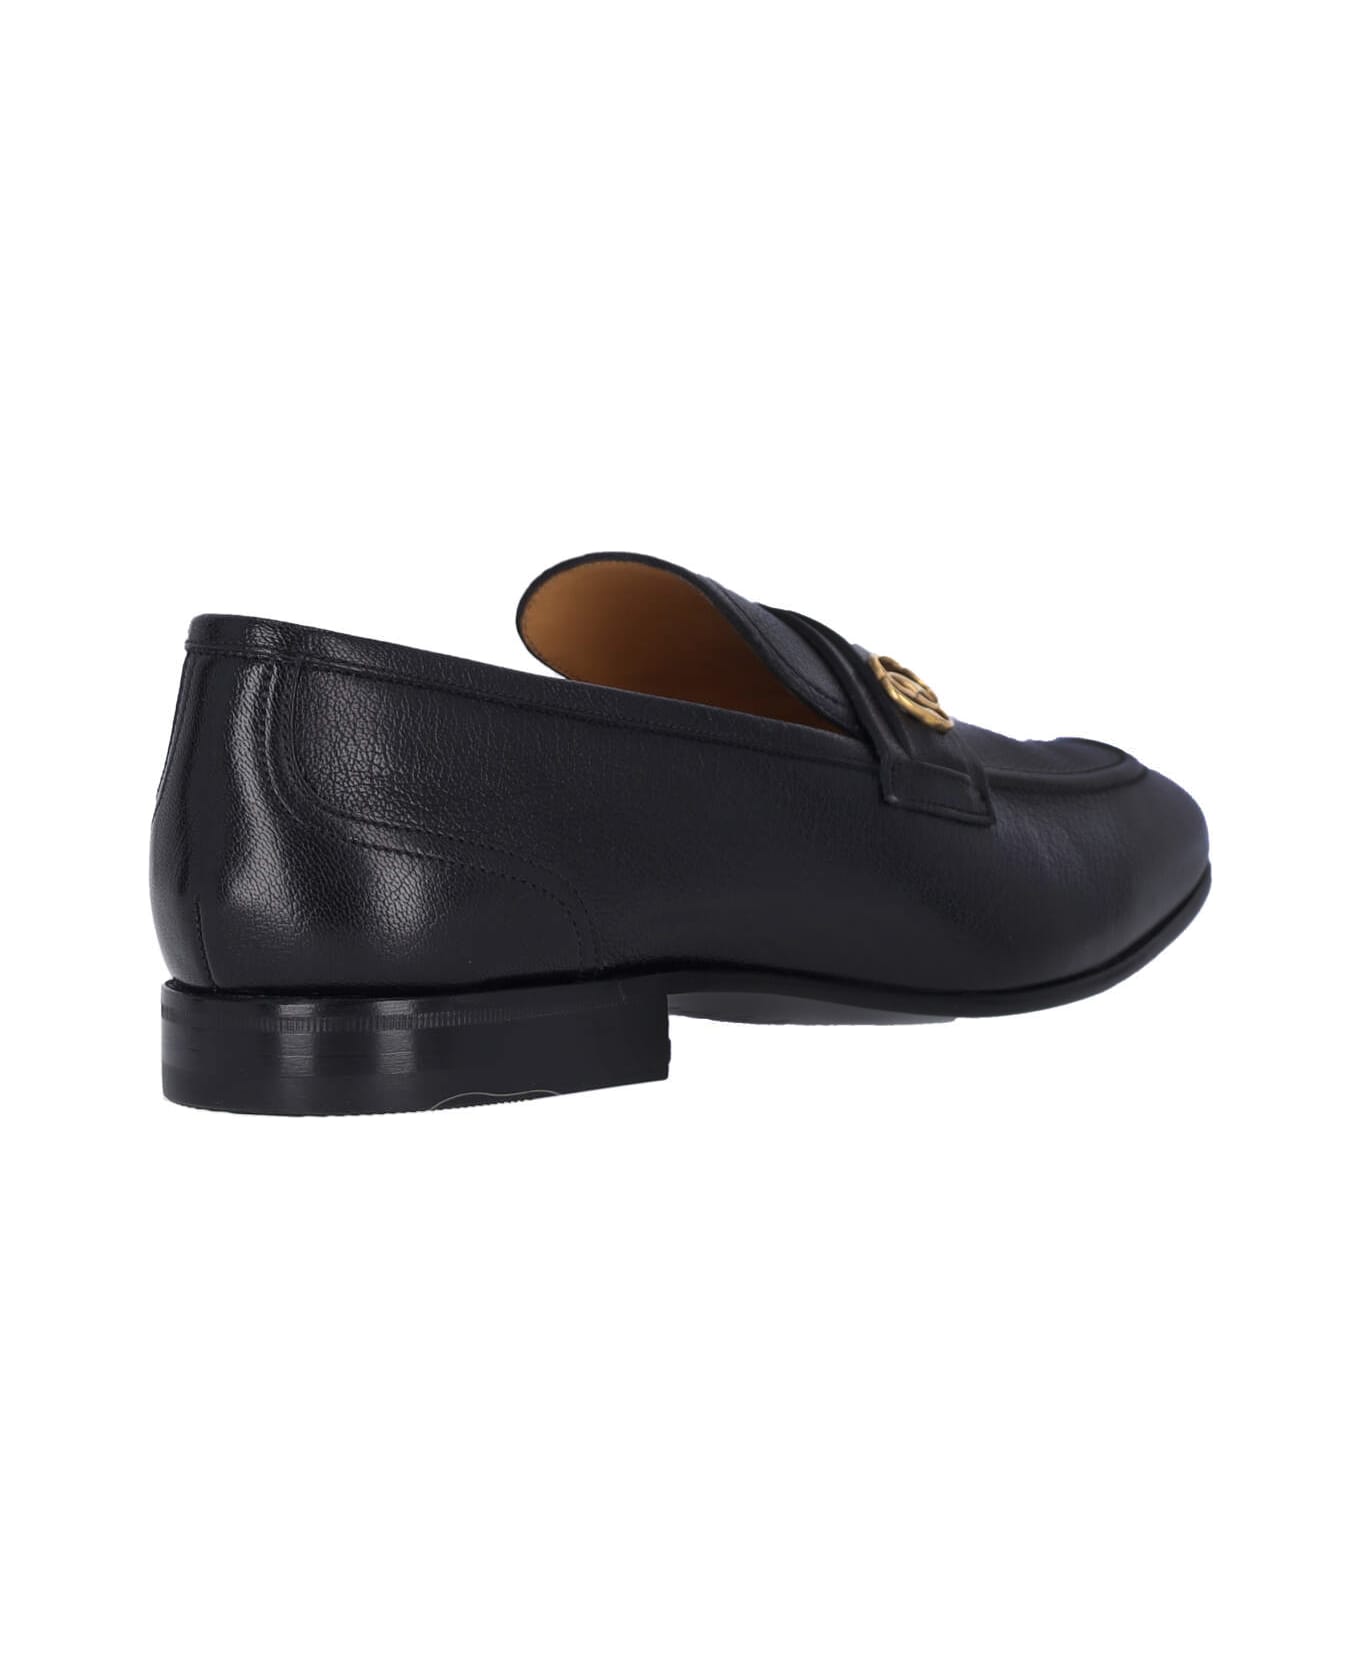 Bally 'suisse' Loafers - Black   ローファー＆デッキシューズ